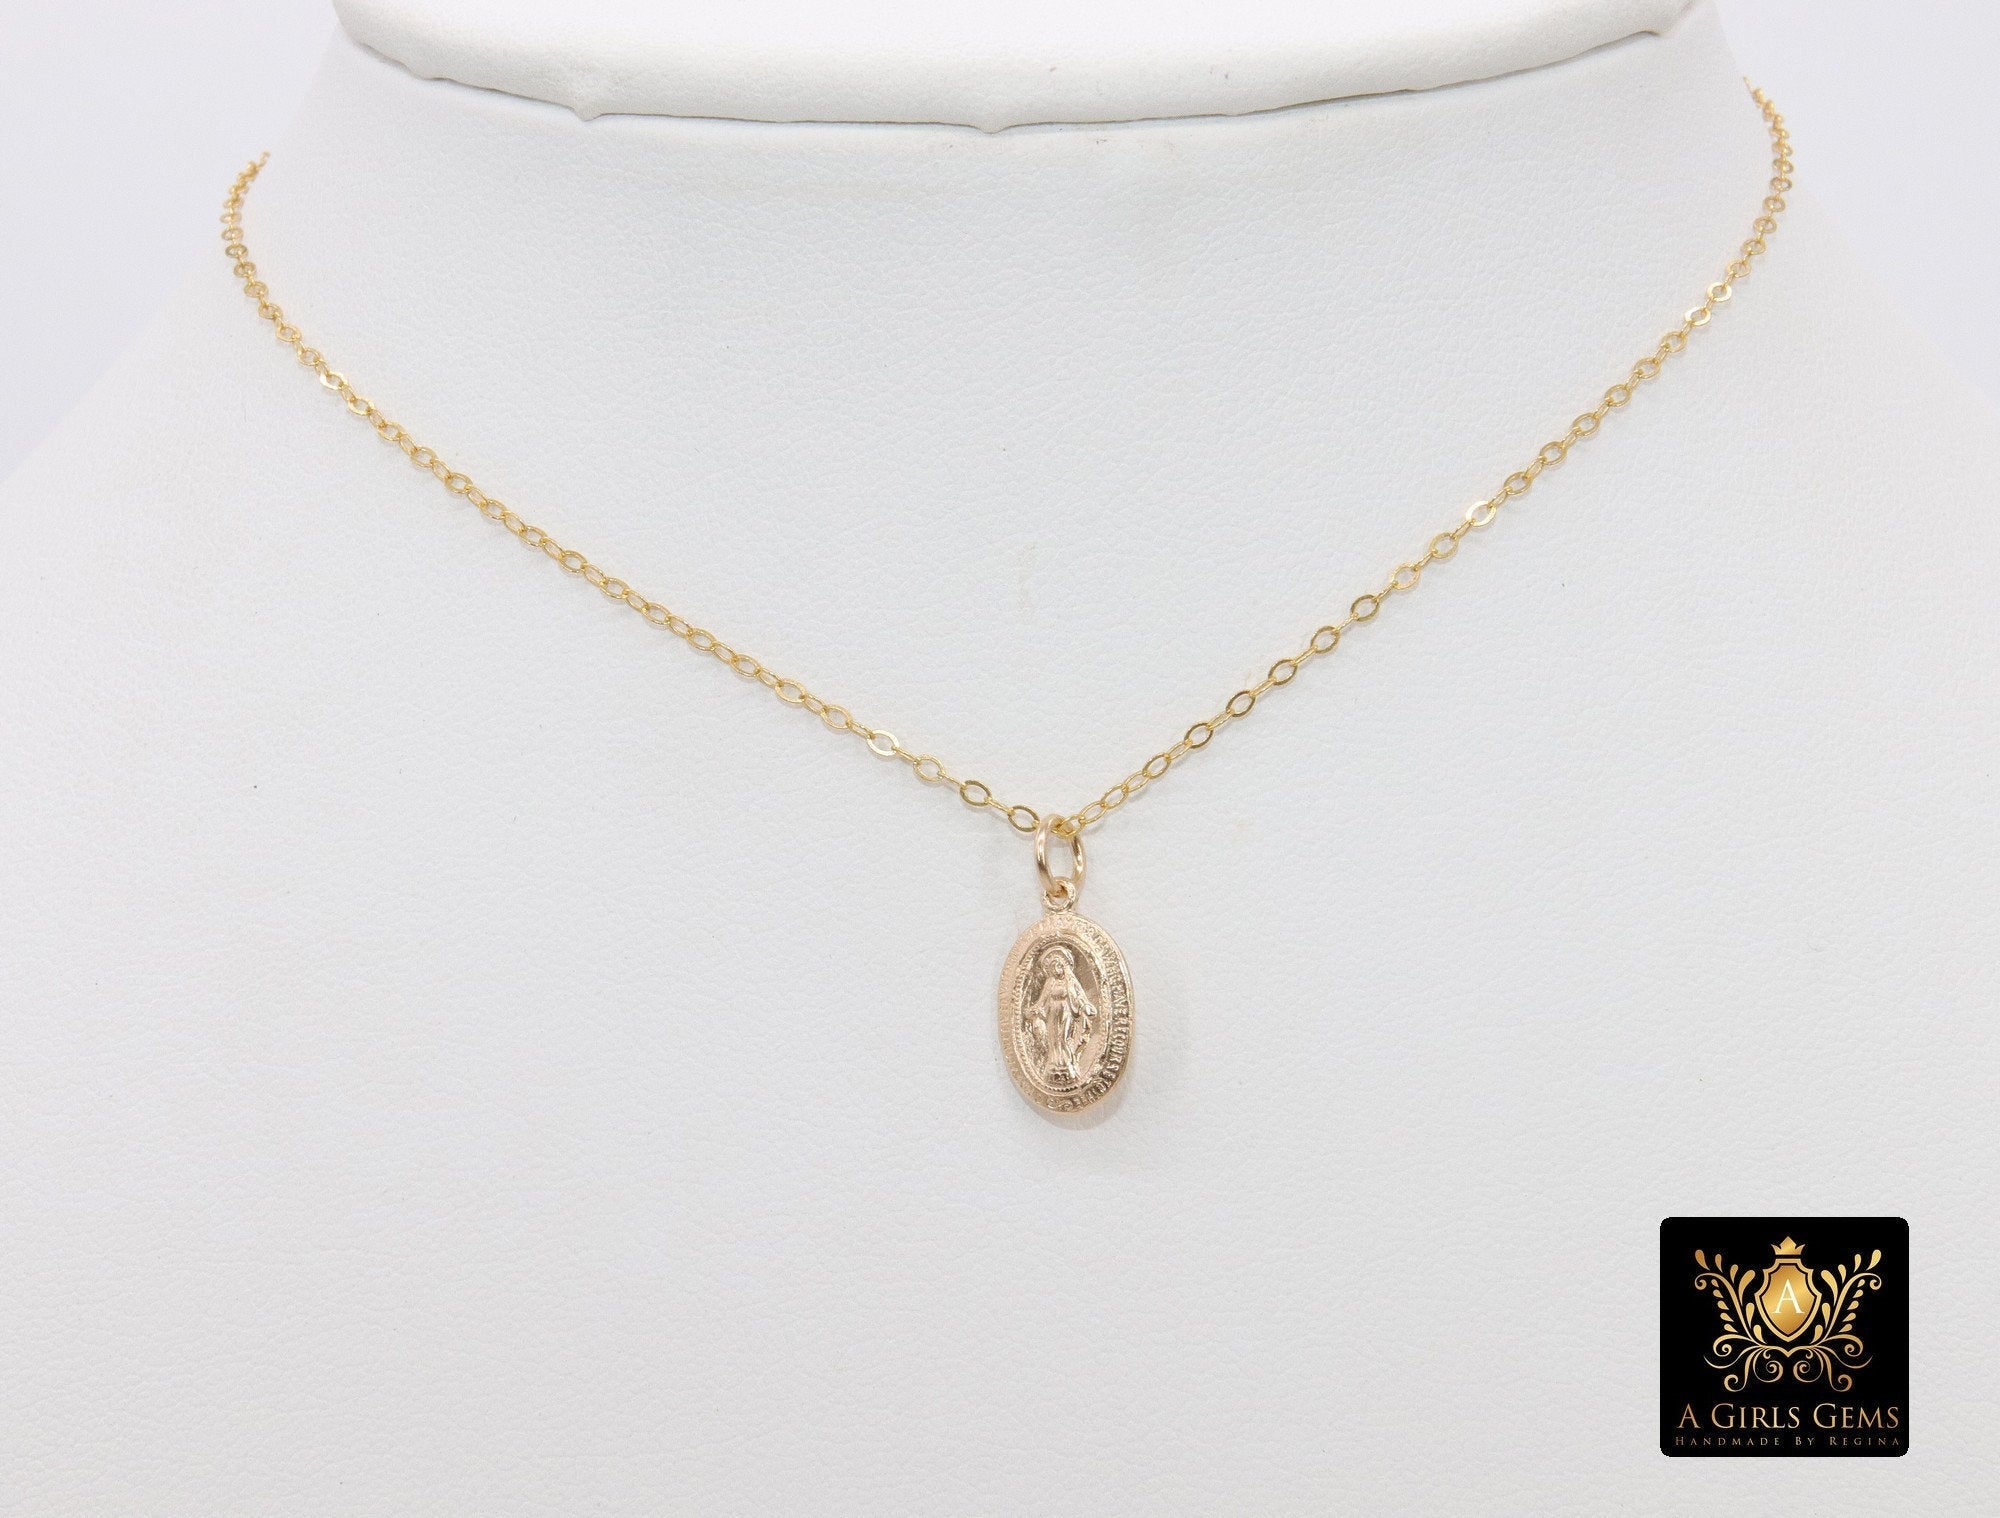 14 K Gold Filled Virgin Mary Hammered Chain Necklace, 925 Sterling Silver Mother Mary Choker, Mommy and Me Madonna Necklaces - A Girls Gems